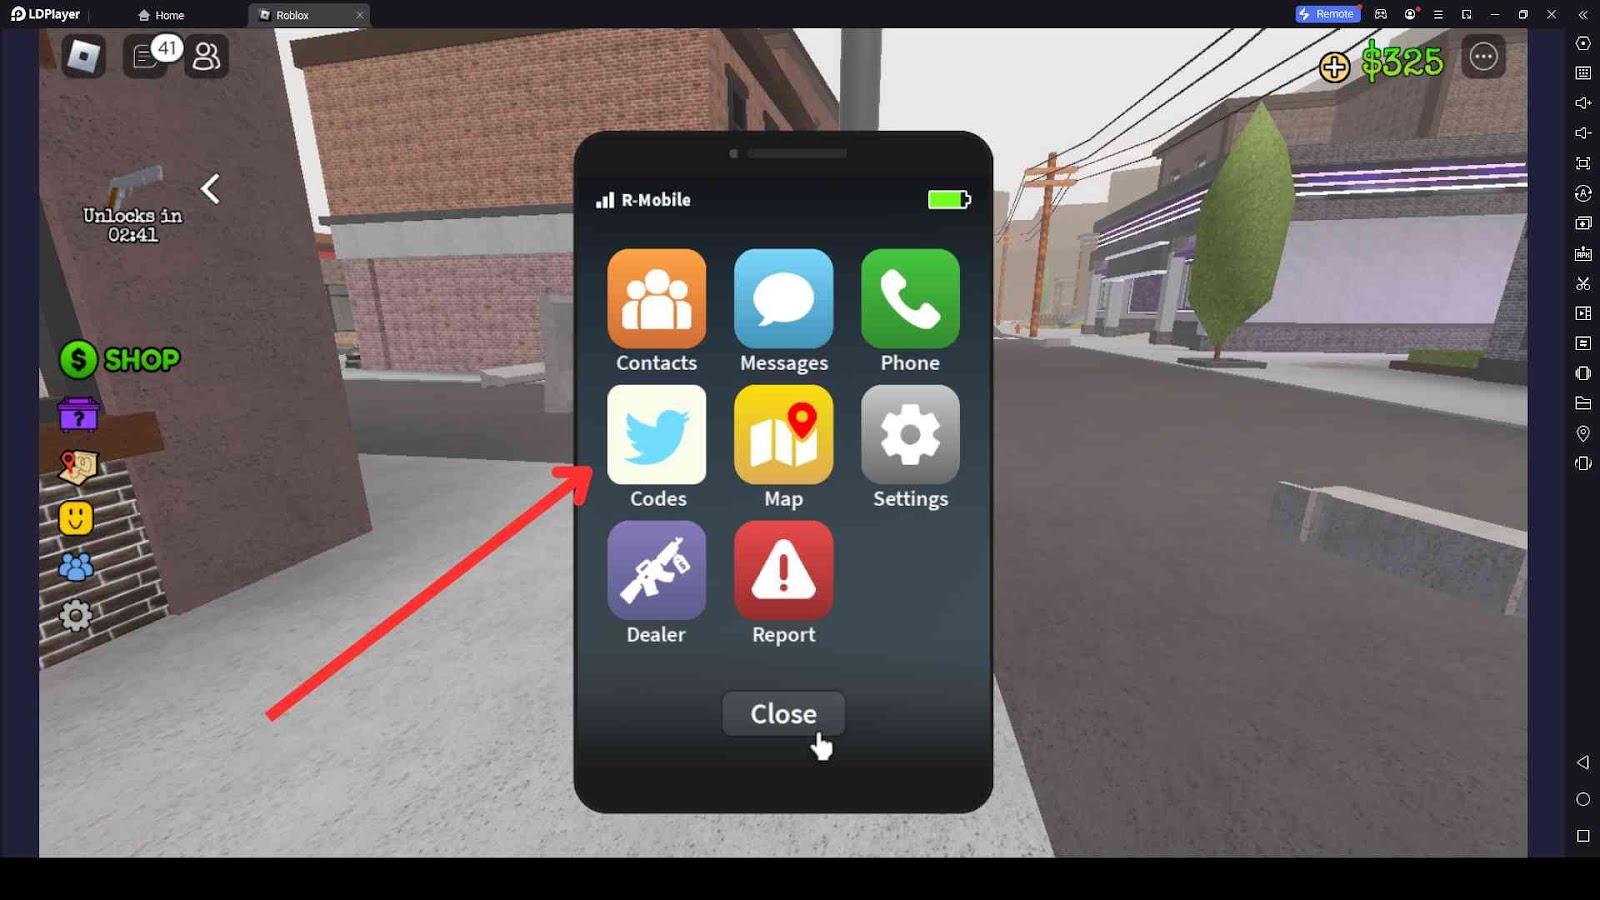 How To Redeem Codes in Roblox Mobile 